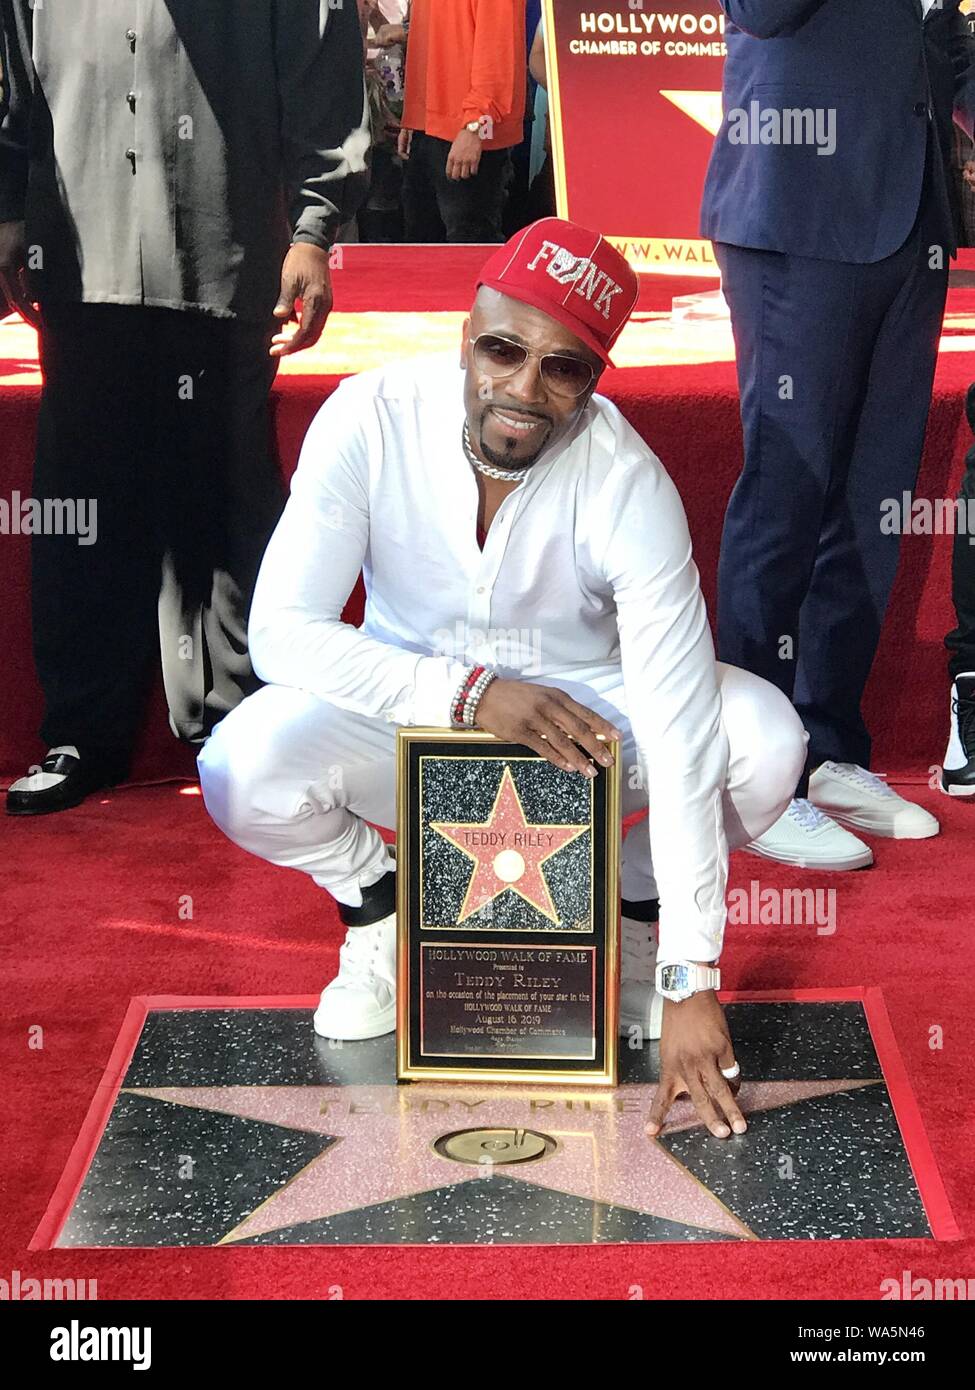 August 16, 2019, Hollywood, California, USA: I16060CHW.Hollywood Chamber Of Commerce Honor Recording Artist/Music Producer TEDDY RILEY With Star On The Hollywood Walk Of Fame.6405 Hollywood Boulevard, Hollywood, California, USA  .08/16/2019 .TEDDY RILEY.Â©Clinton H.Wallace/Photomundo International/  Photos Inc  (Credit Image: © Clinton Wallace/Globe Photos via ZUMA Wire) Stock Photo